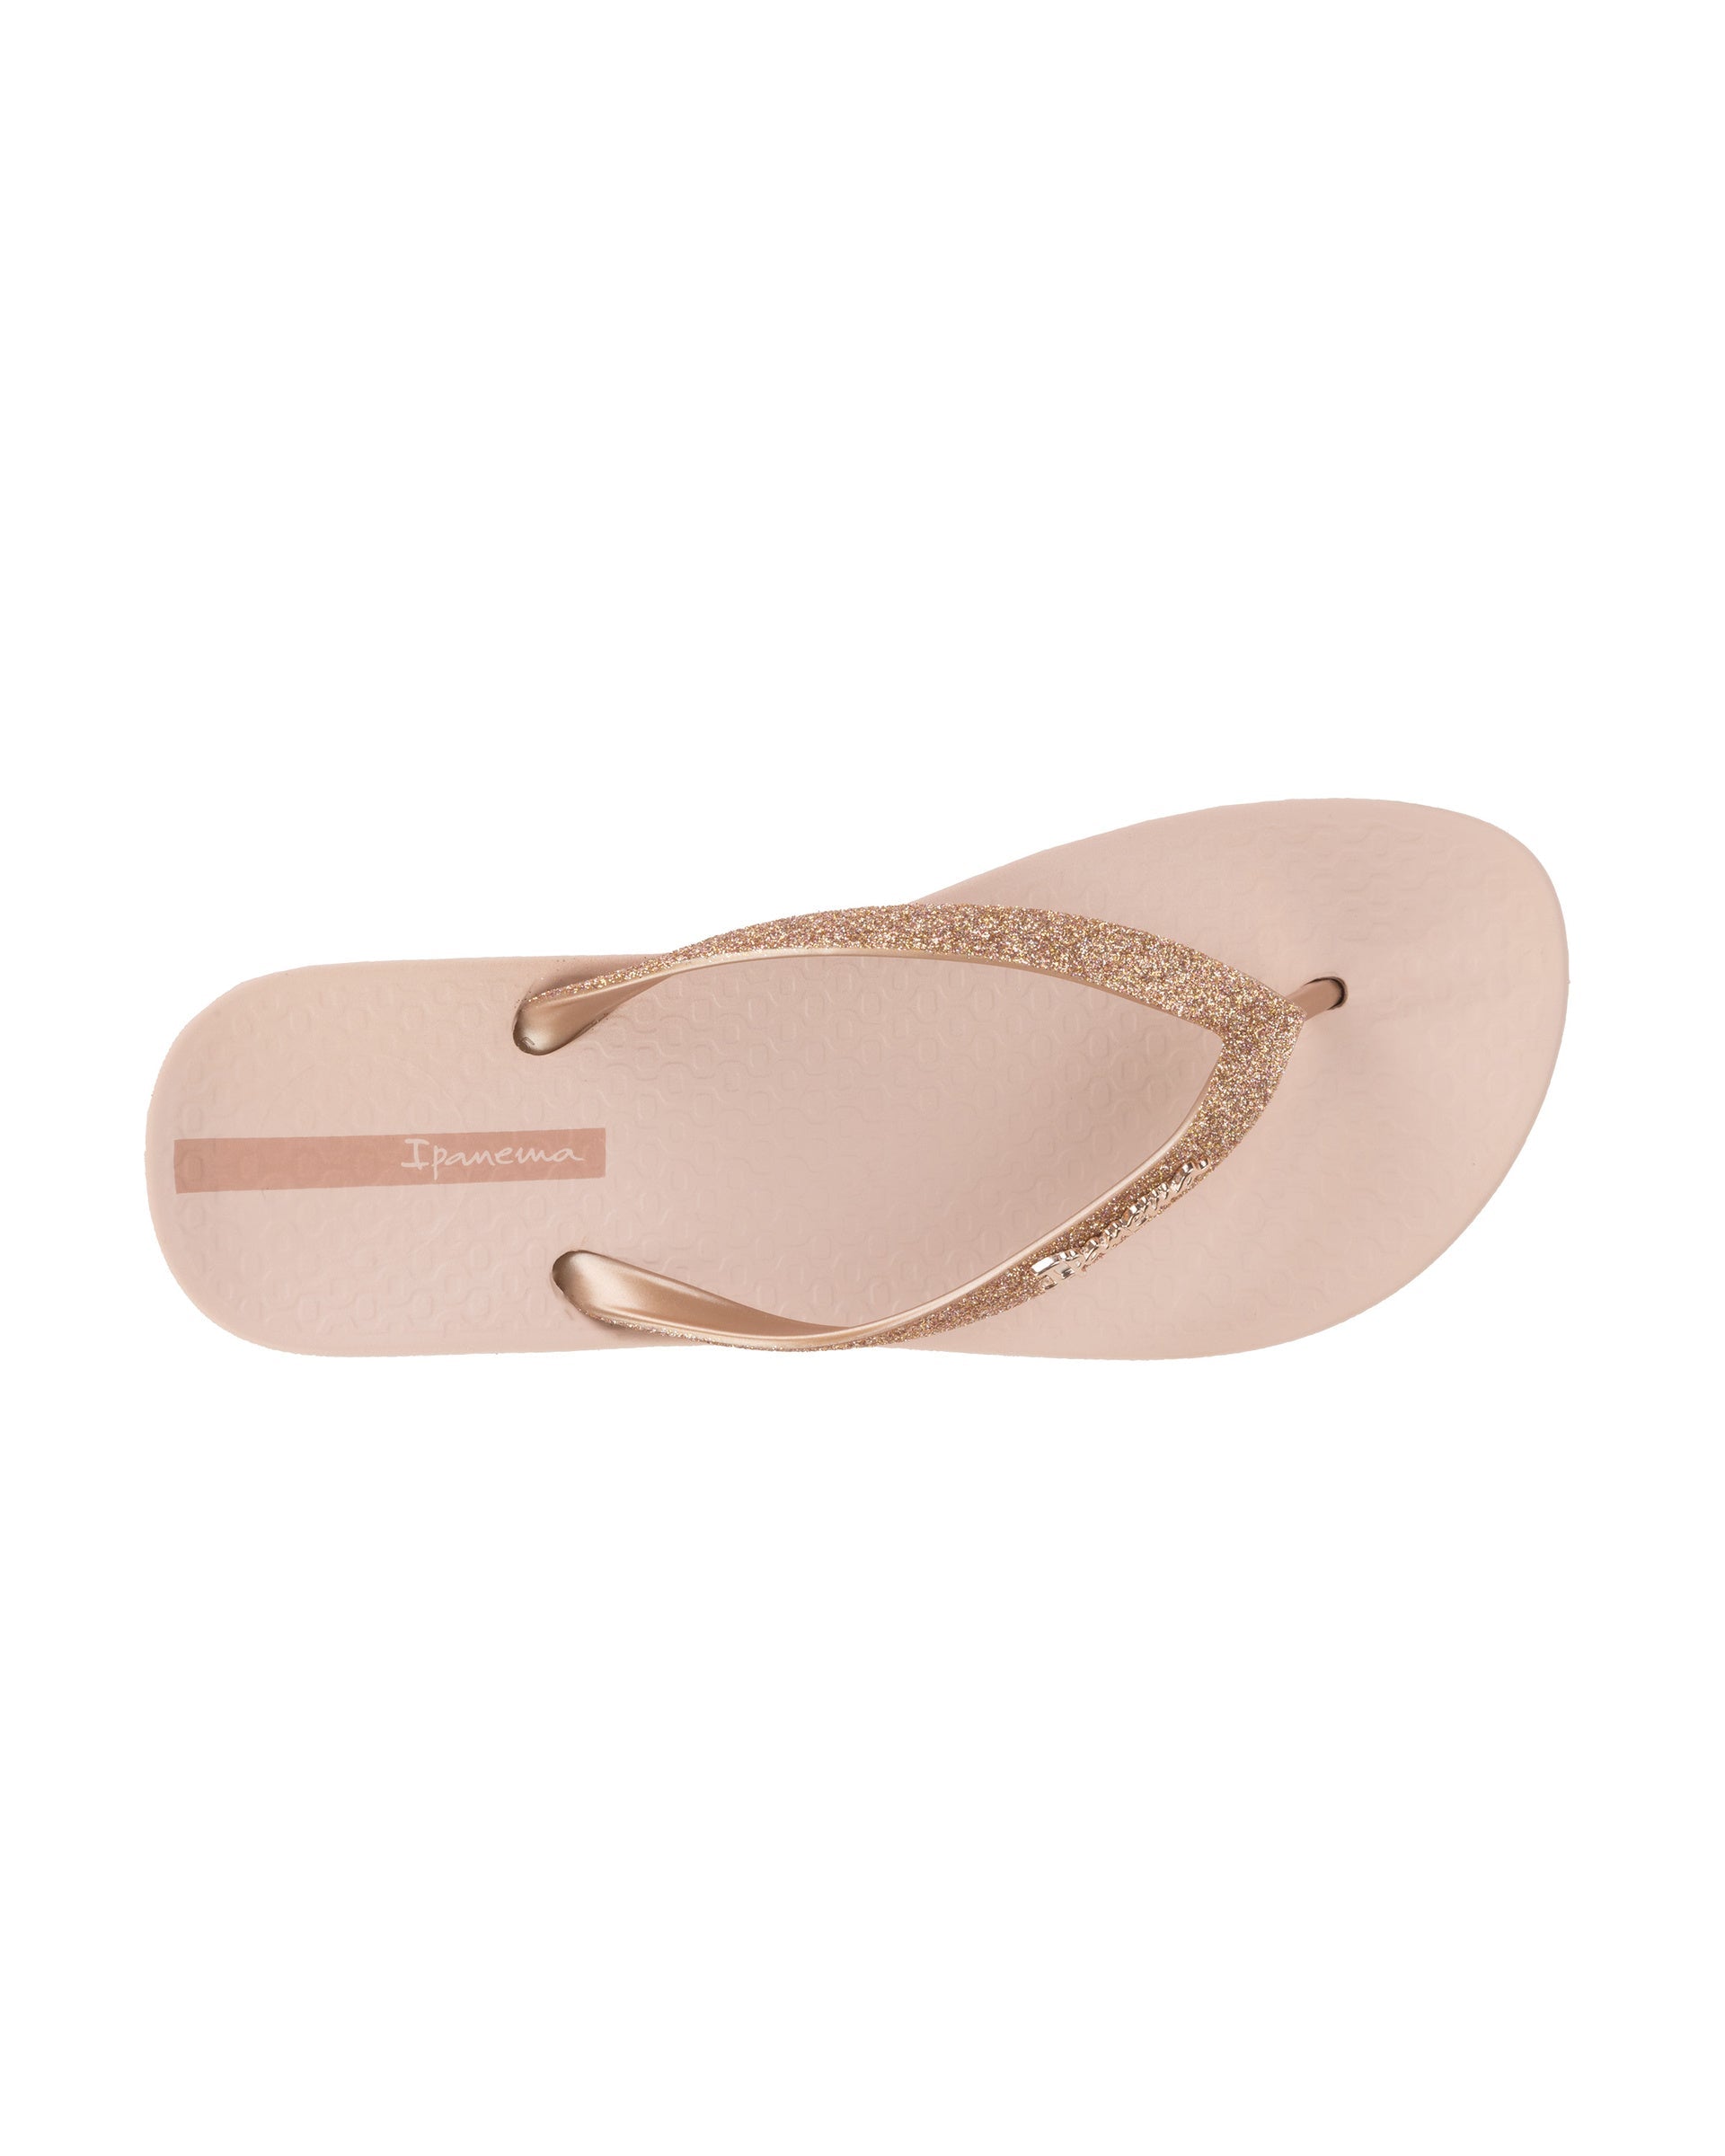 Top view of a pink Ipanema Ana Sparkle women's flip flop with glitter rose gold straps.